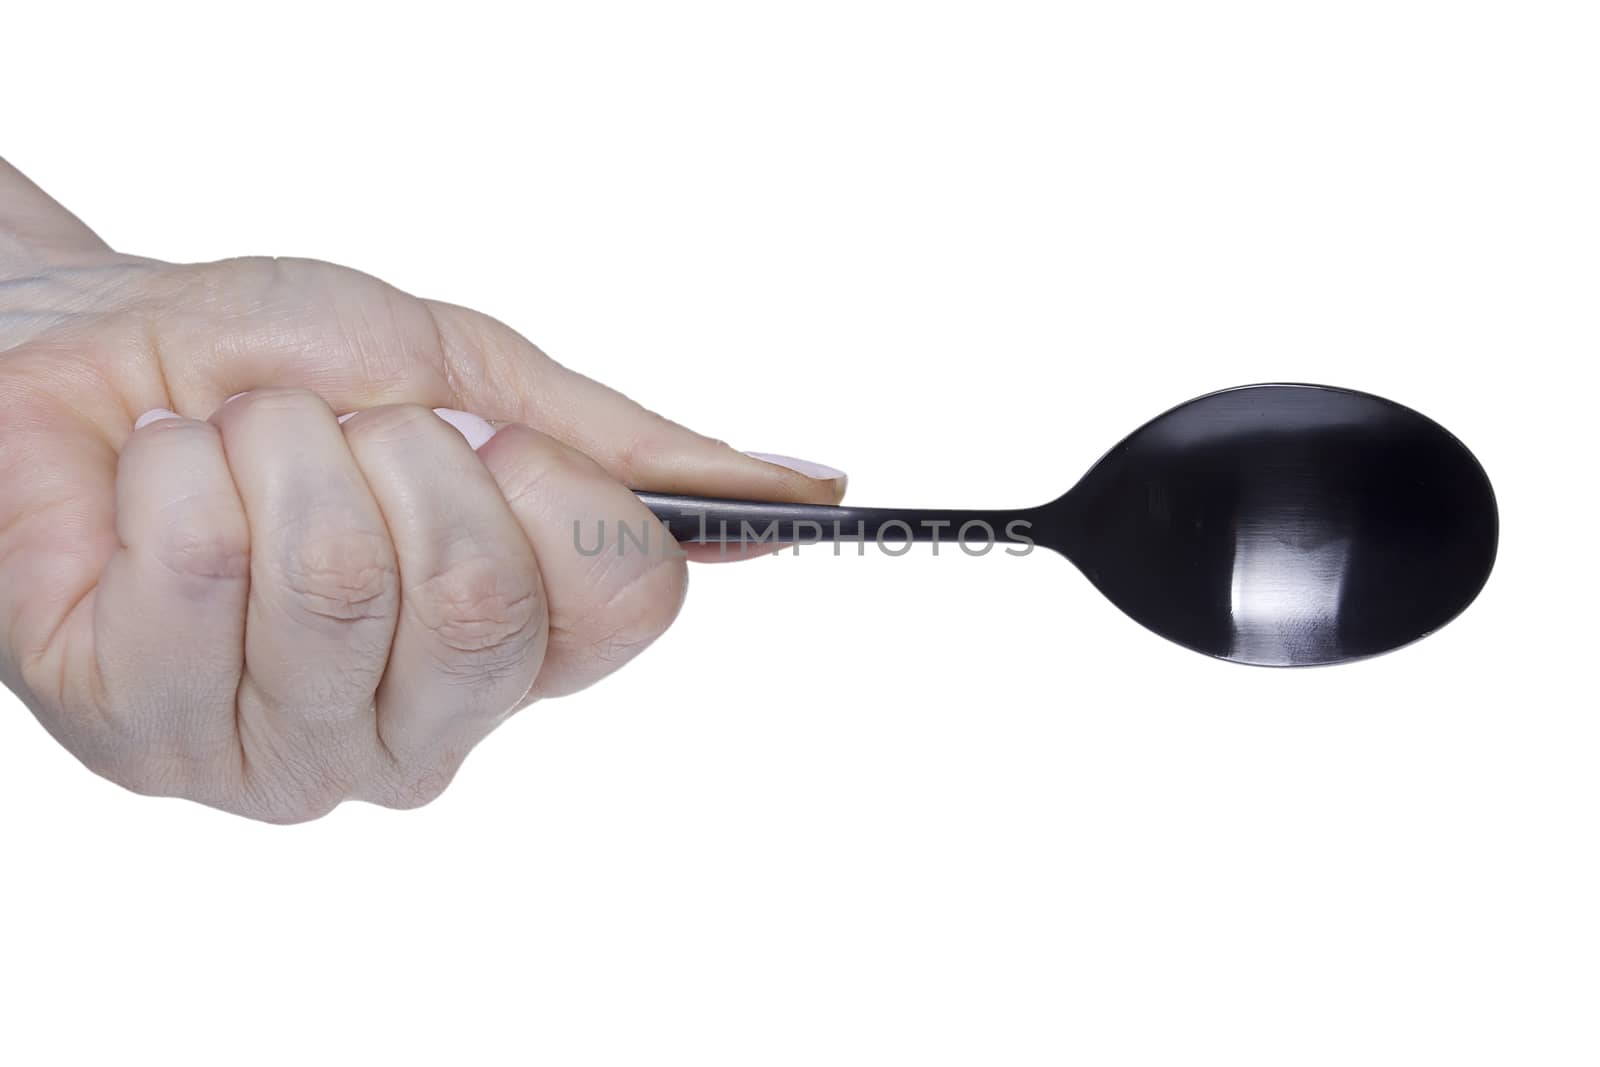 Female hand with a spoon on a white background